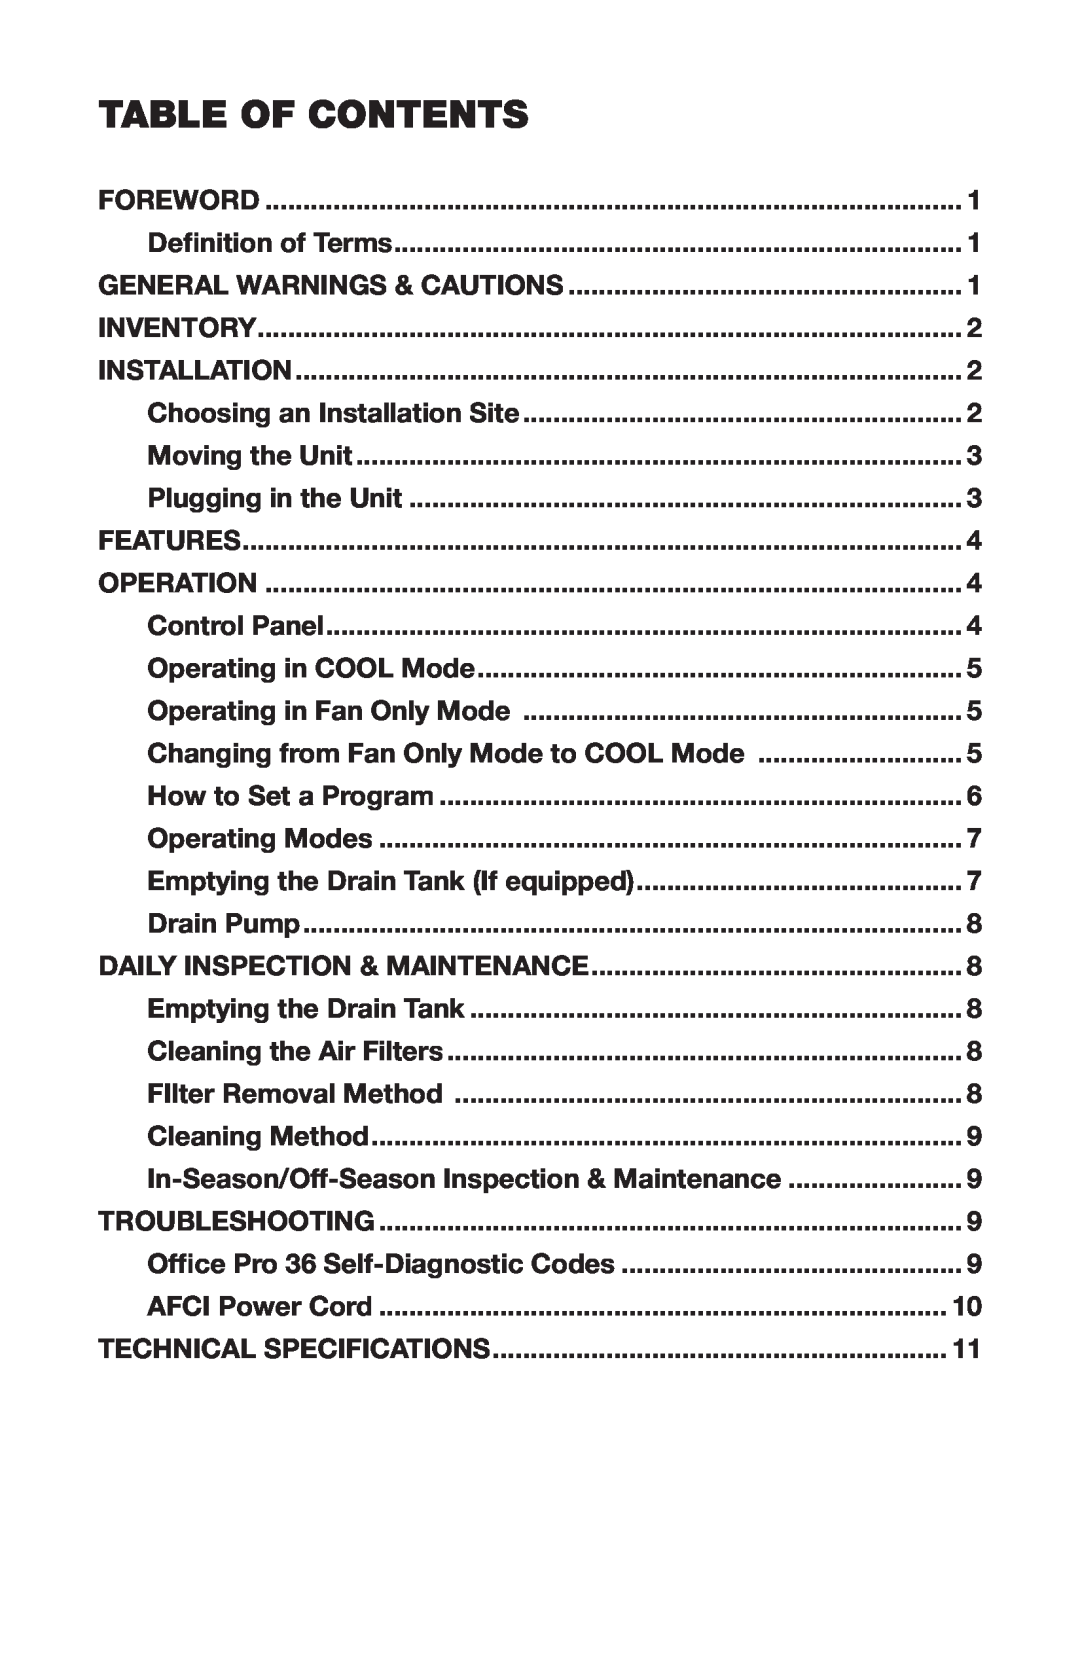 Denso 36 operation manual Table Of Contents 